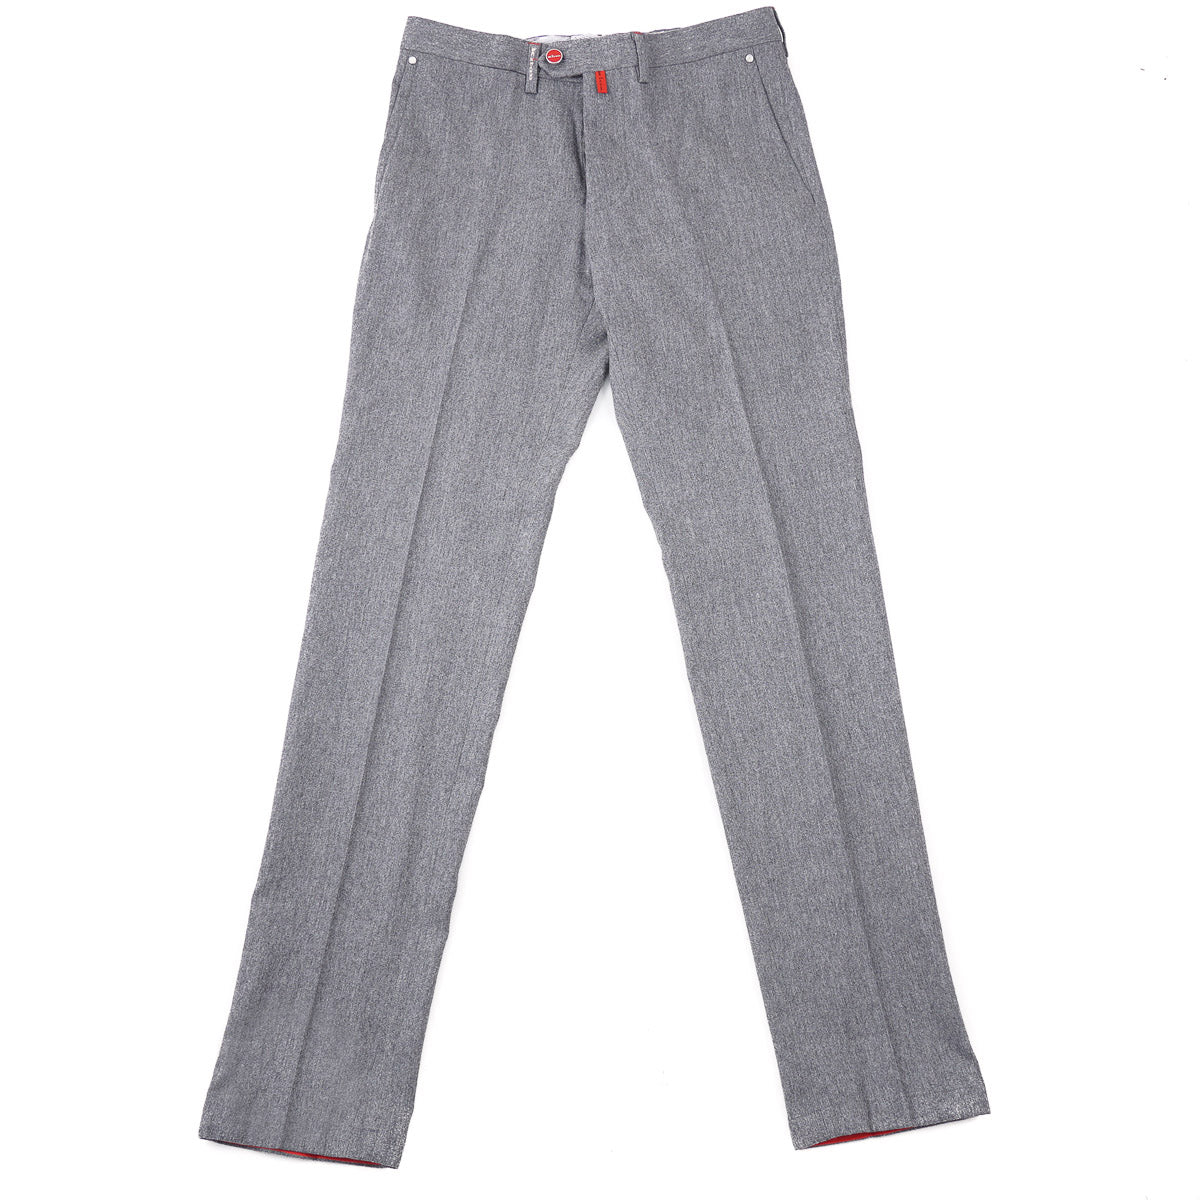 Kiton Button-Fly Flannel Wool Pants - Top Shelf Apparel